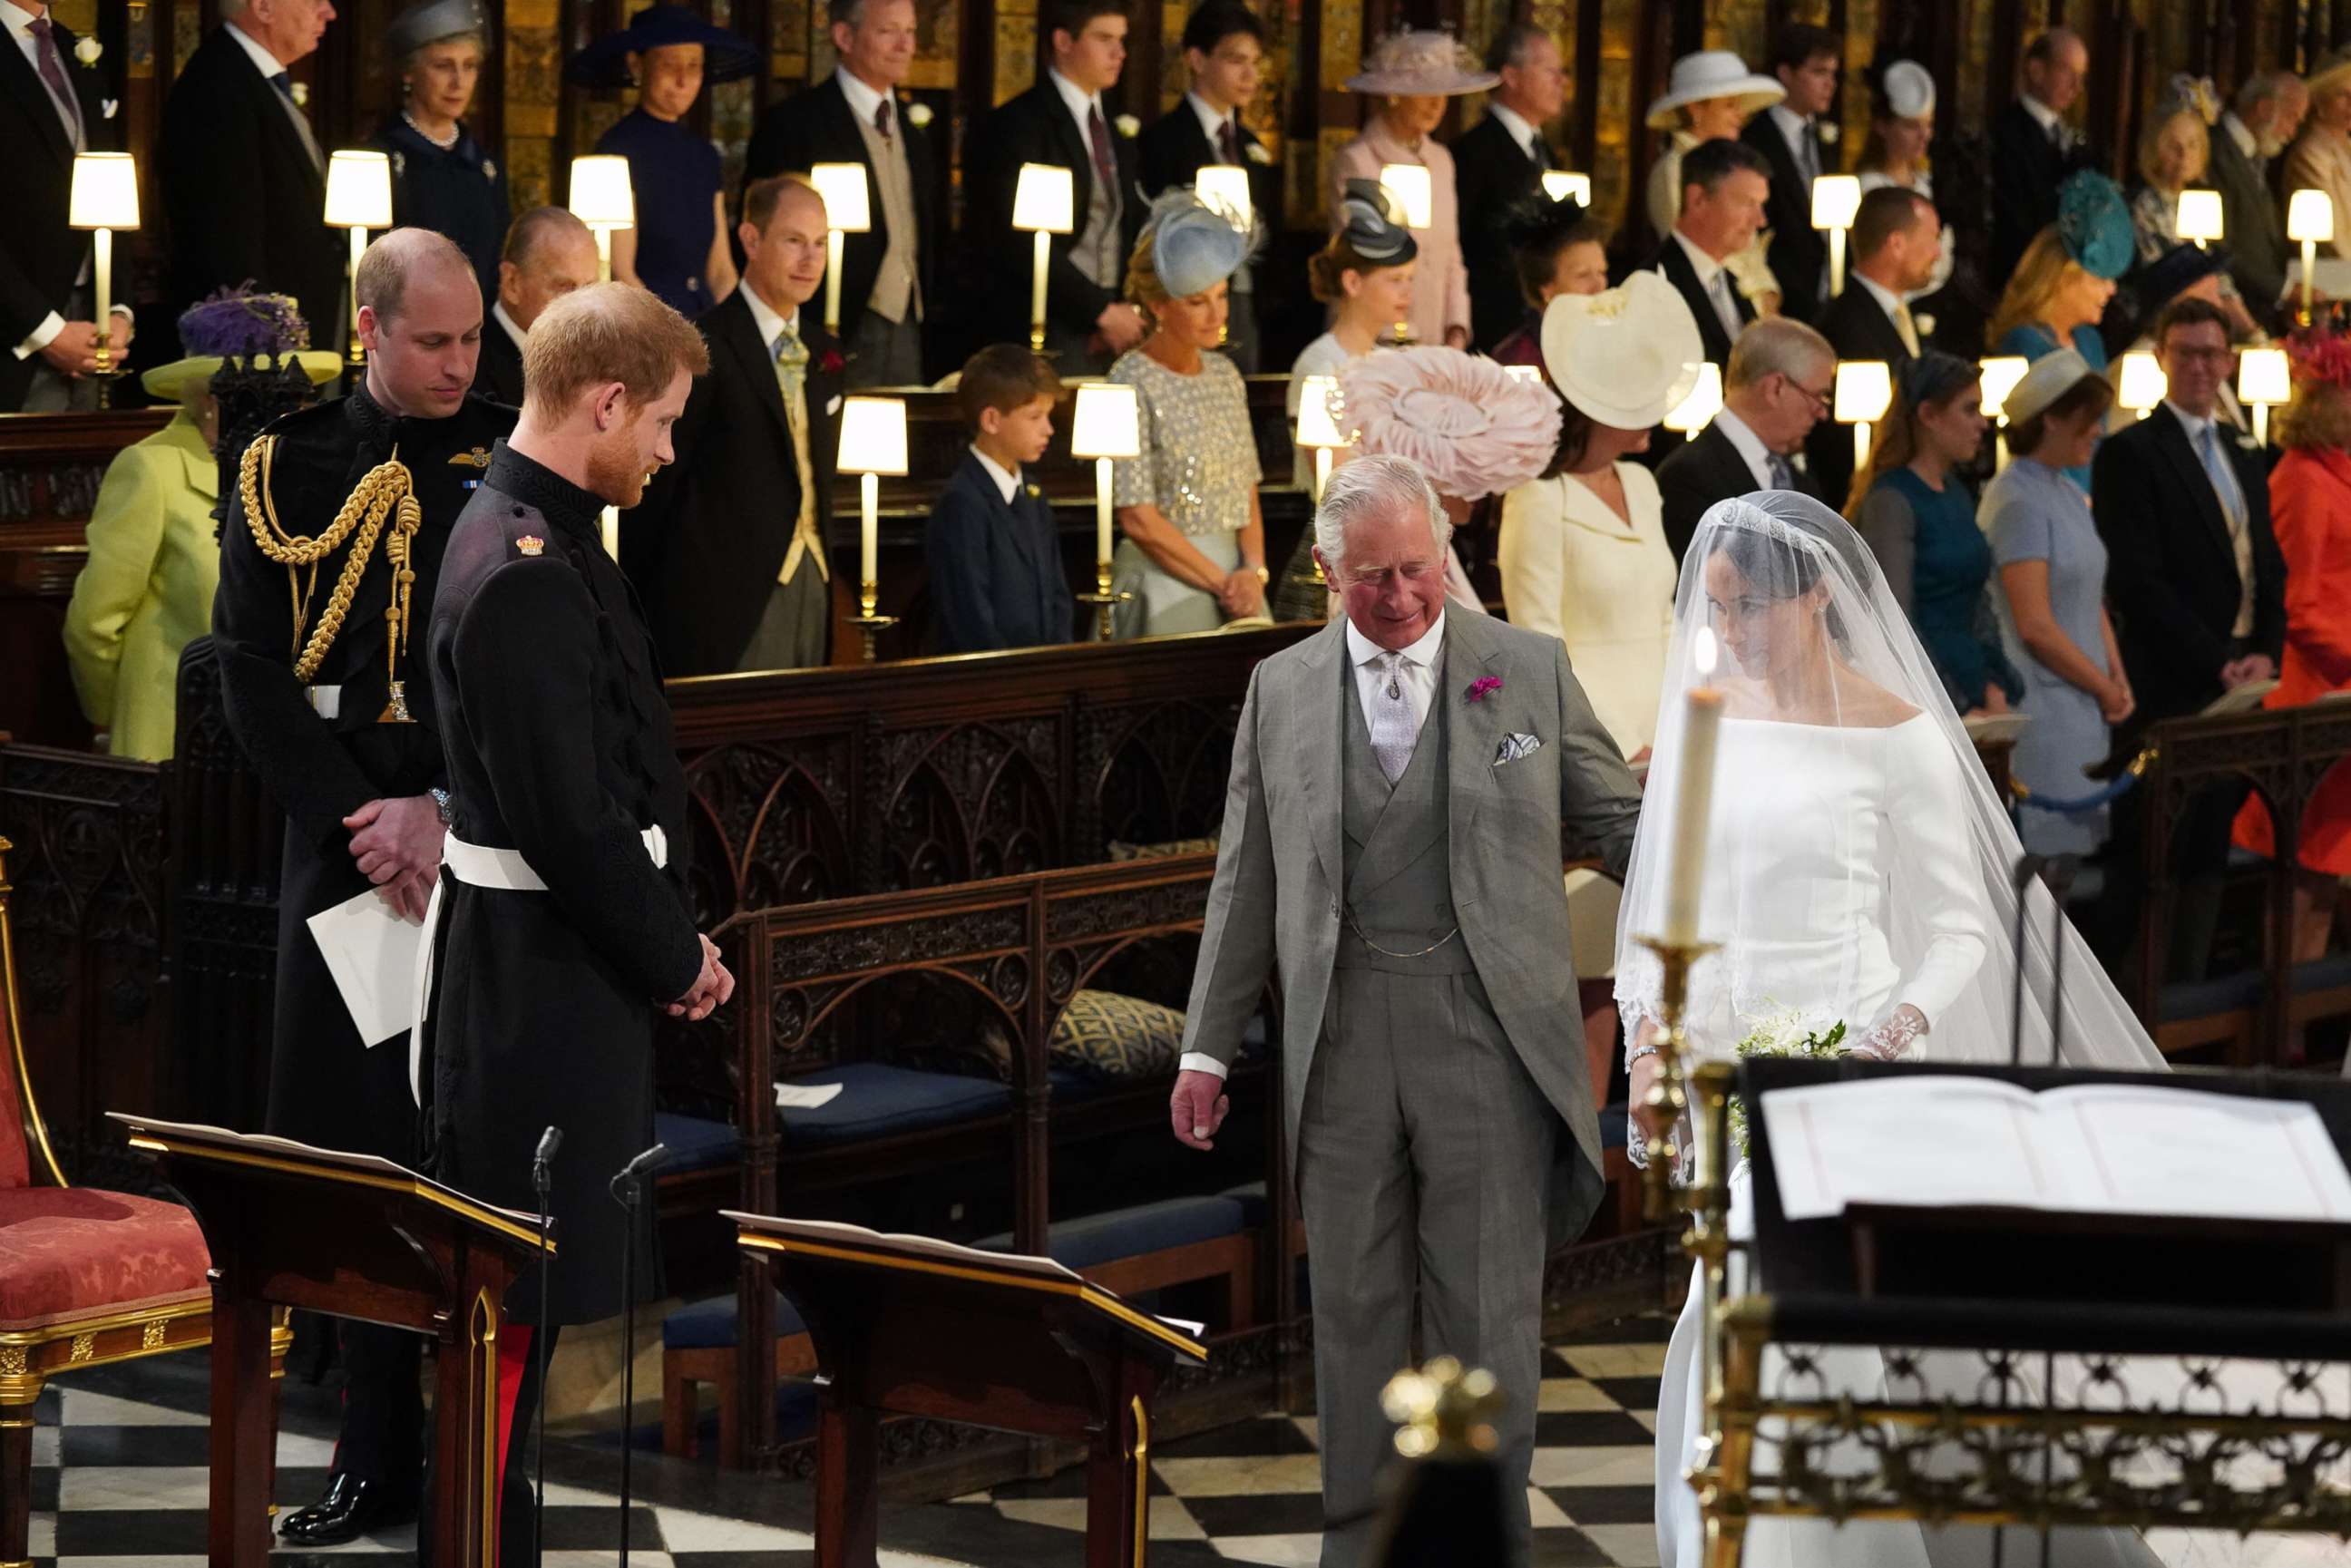 PHOTO: Britain's Prince Harry looks at his bride, Meghan Markle, as she arrives accompanied by the Britain's Prince Charles in St George's Chapel during their wedding ceremony in St George's Chapel, Windsor Castle, in Windsor, May 19, 2018.